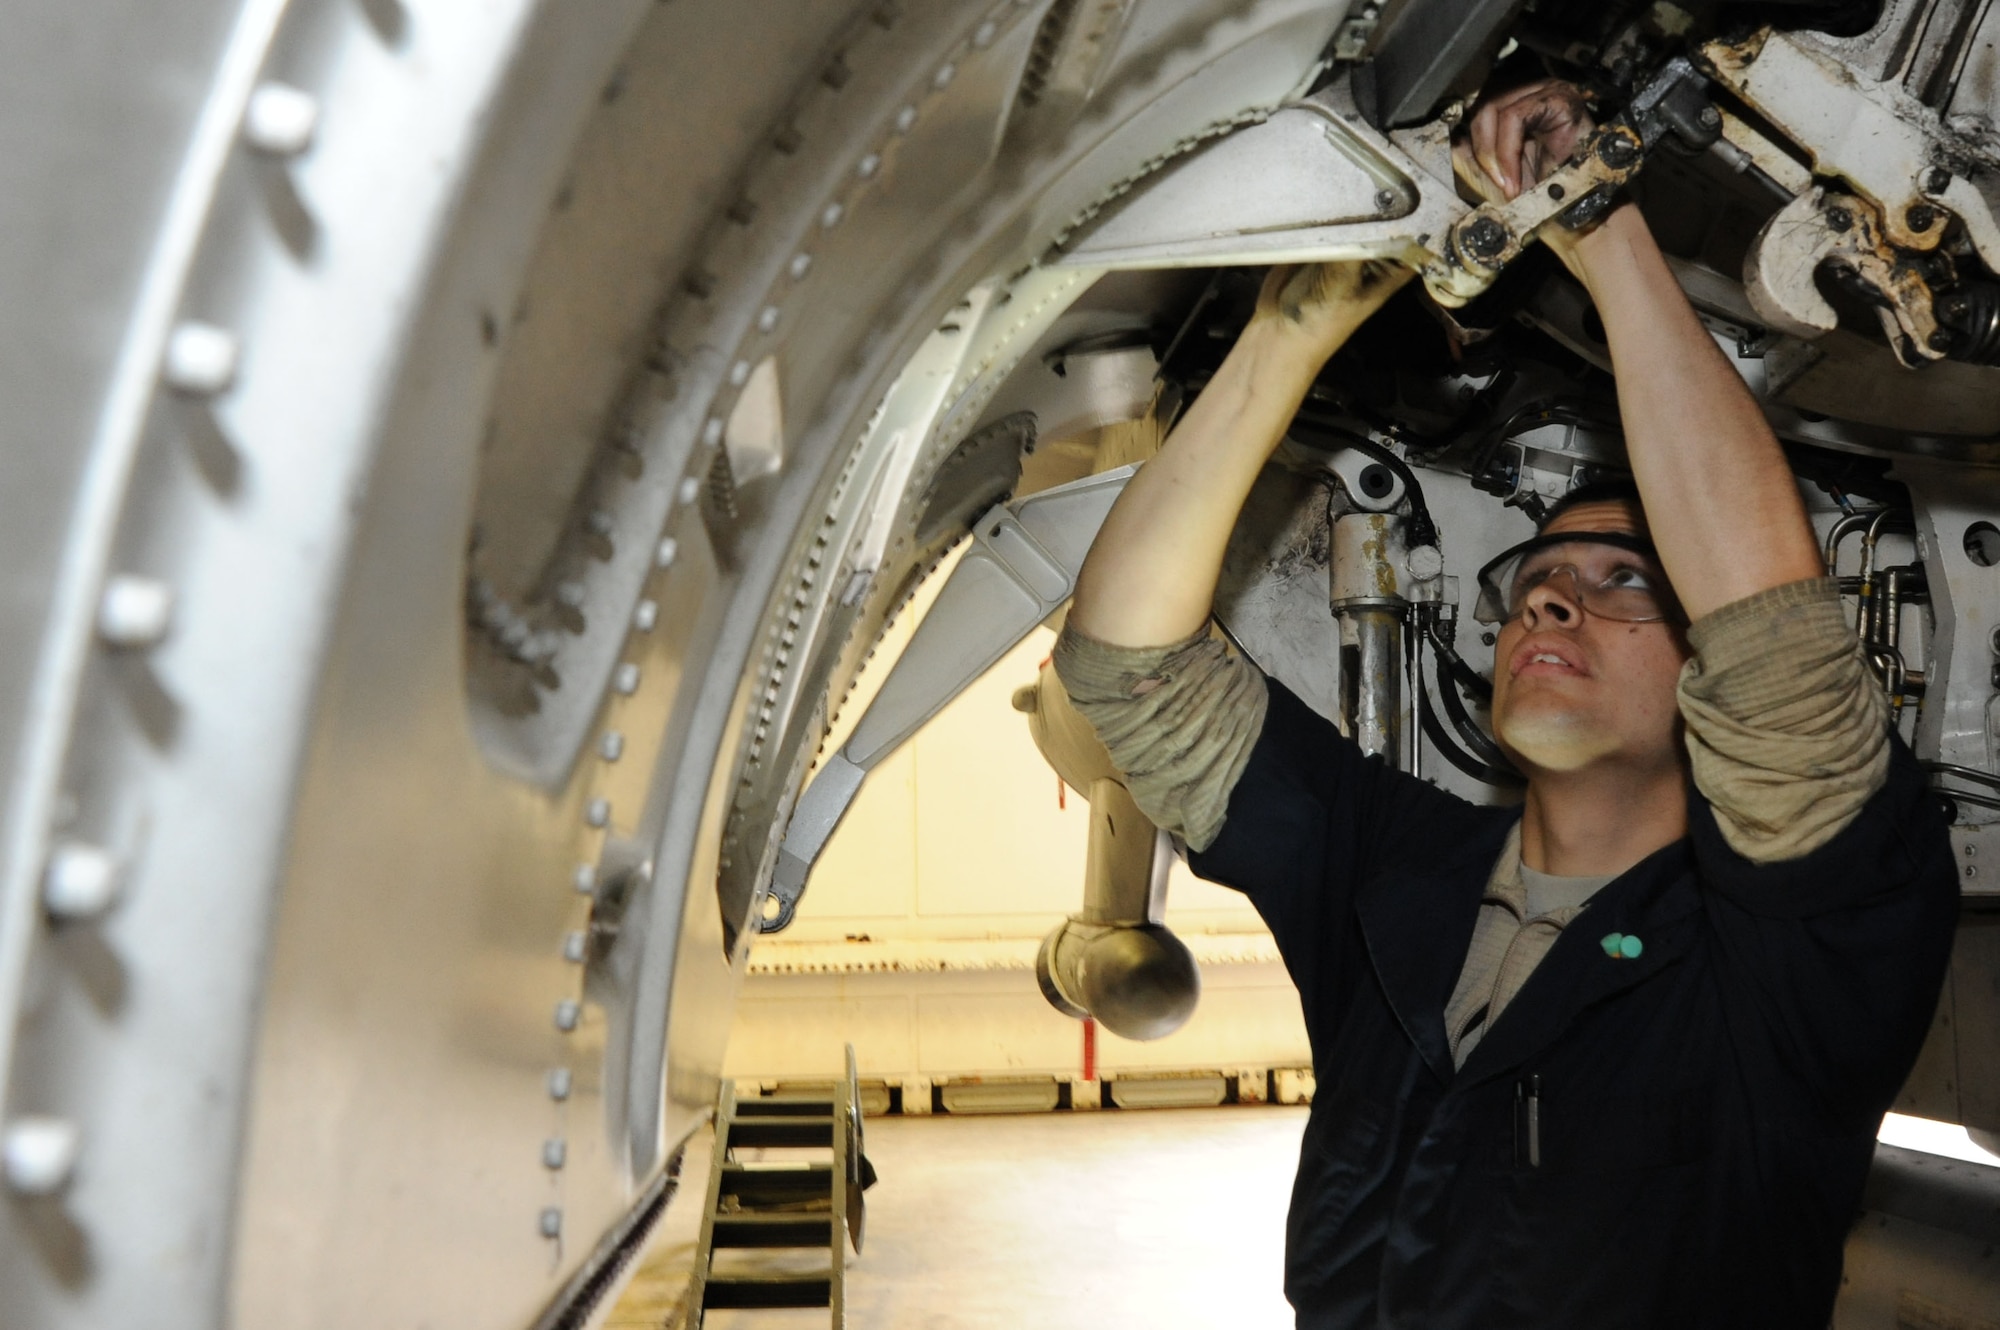 U.S. Air Force Senior Airman Jacob Gonzalez, 35th Aircraft Maintenance Squadron, works on the main landing gear door of a U.S. Air Force F-16 Fighting Falcon during an Operational Readiness Exercise at Misawa Air Base, Japan, June 12, 2013. Gonzalez, a 5-year Air Force veteran, said he takes pride in playing a behind-the-scenes role of the 35th Fighter Wing mission, which is the suppression of enemy air defenses. (U.S. Air Force photo by Senior Airman Derek VanHorn)